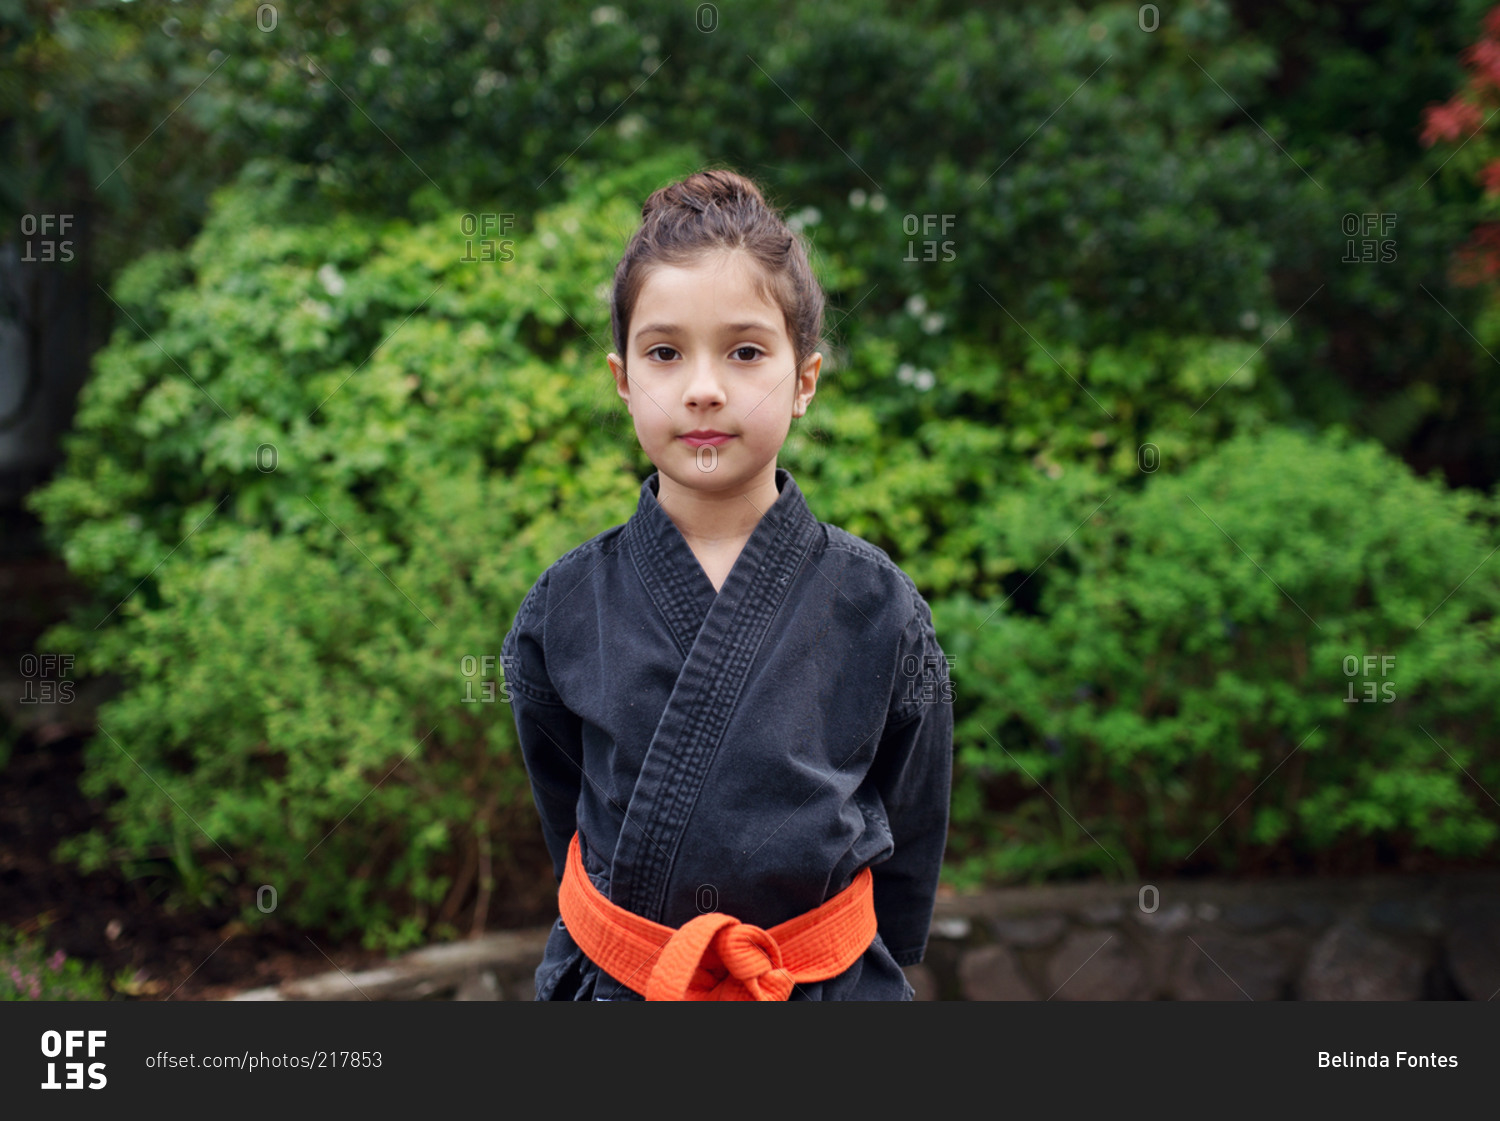 A girl in a karate outfit stands still with her hands behind her back